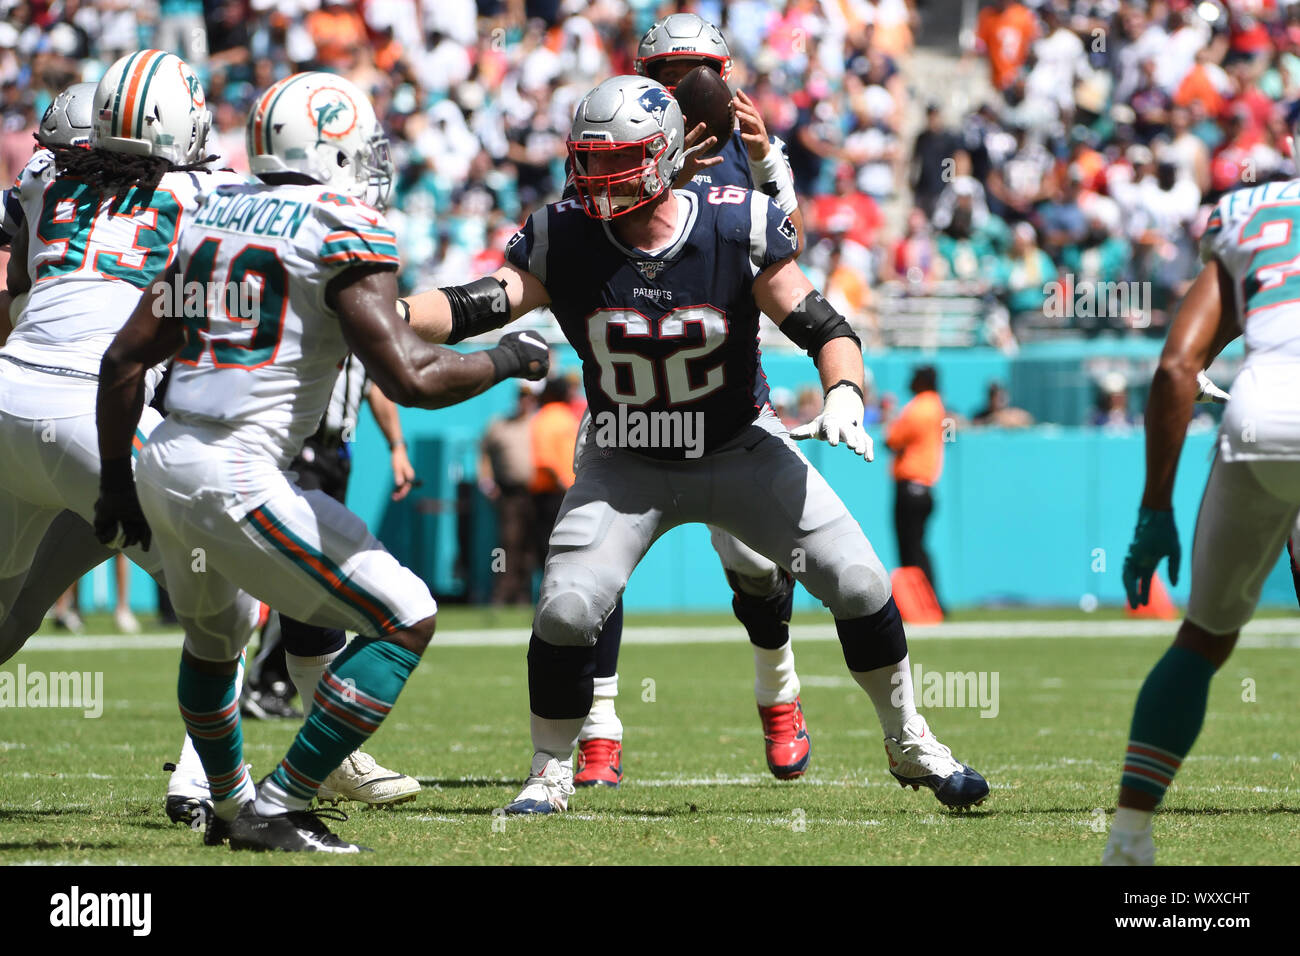 Miami Gardens FL, USA. 15th Sep, 2019. Joe Thuney #62 of New England in action during the NFL football game between the Miami Dolphins and New England Patriots at Hard Rock Stadium in Miami Gardens FL. The Patriots defeated the Dolphins 43-0. Credit: csm/Alamy Live News Stock Photo